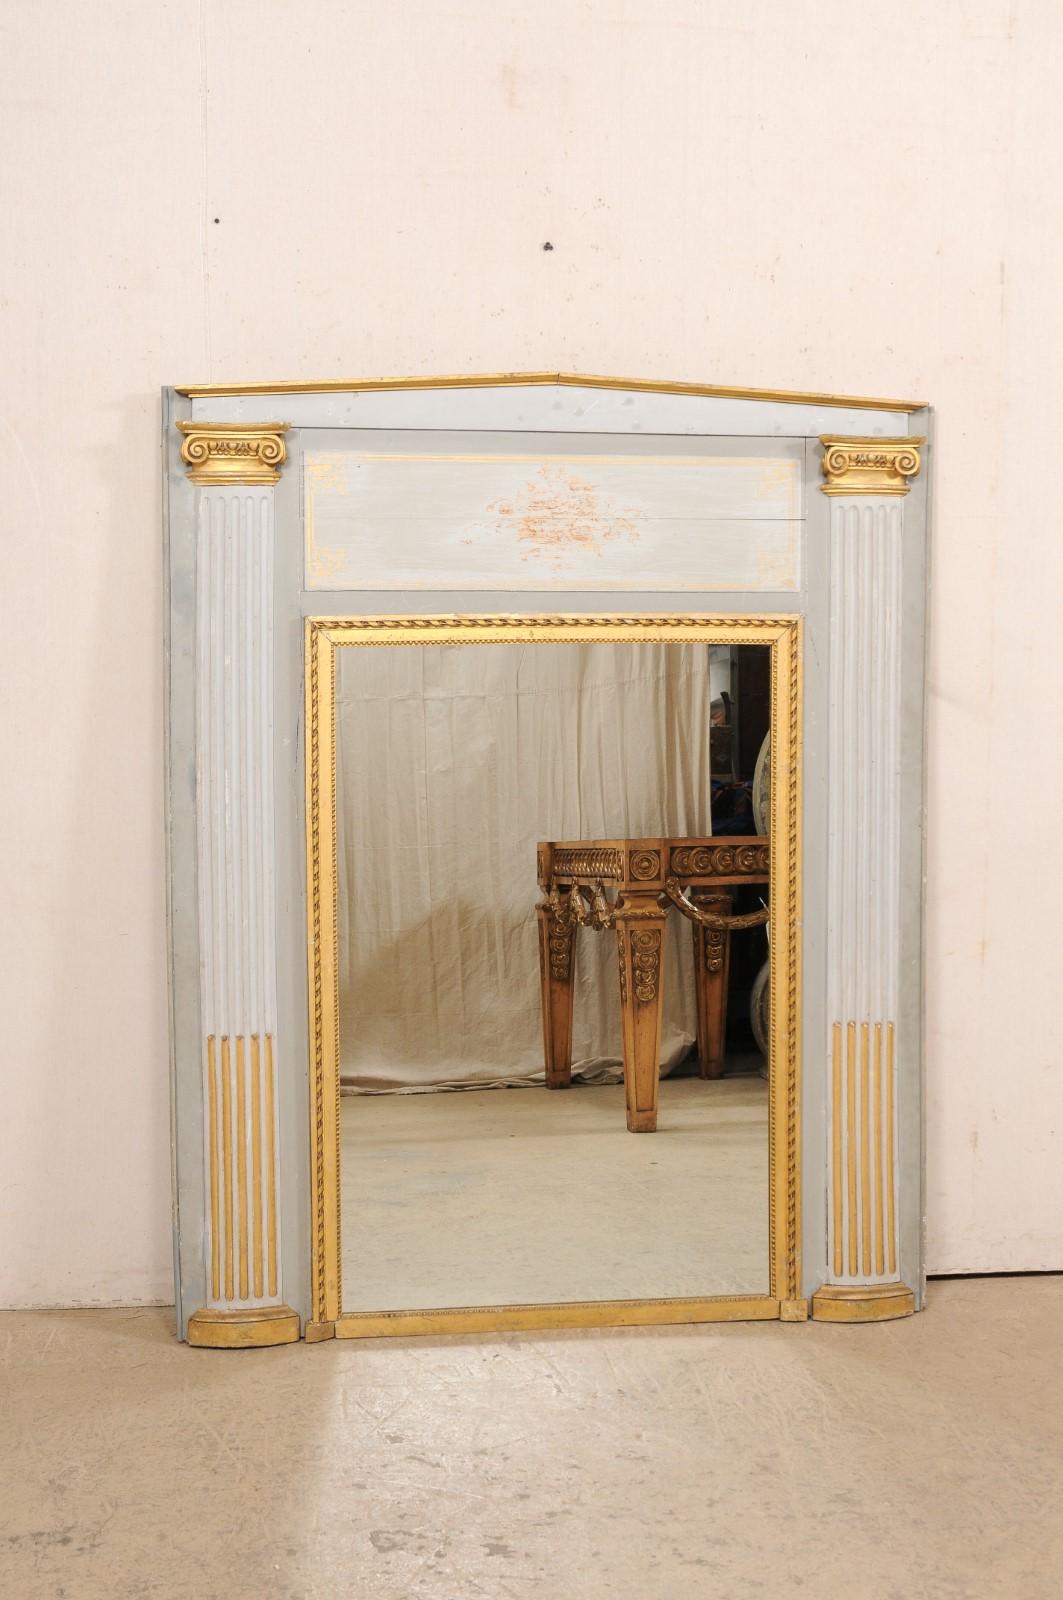 A large French over-mantle mirror with architectural accents from the 19th century. This antique mirror from France has a rectangular-shaped mirror at center with an inner gilt frame in ribbon and petite bead trim. The larger, outer surround